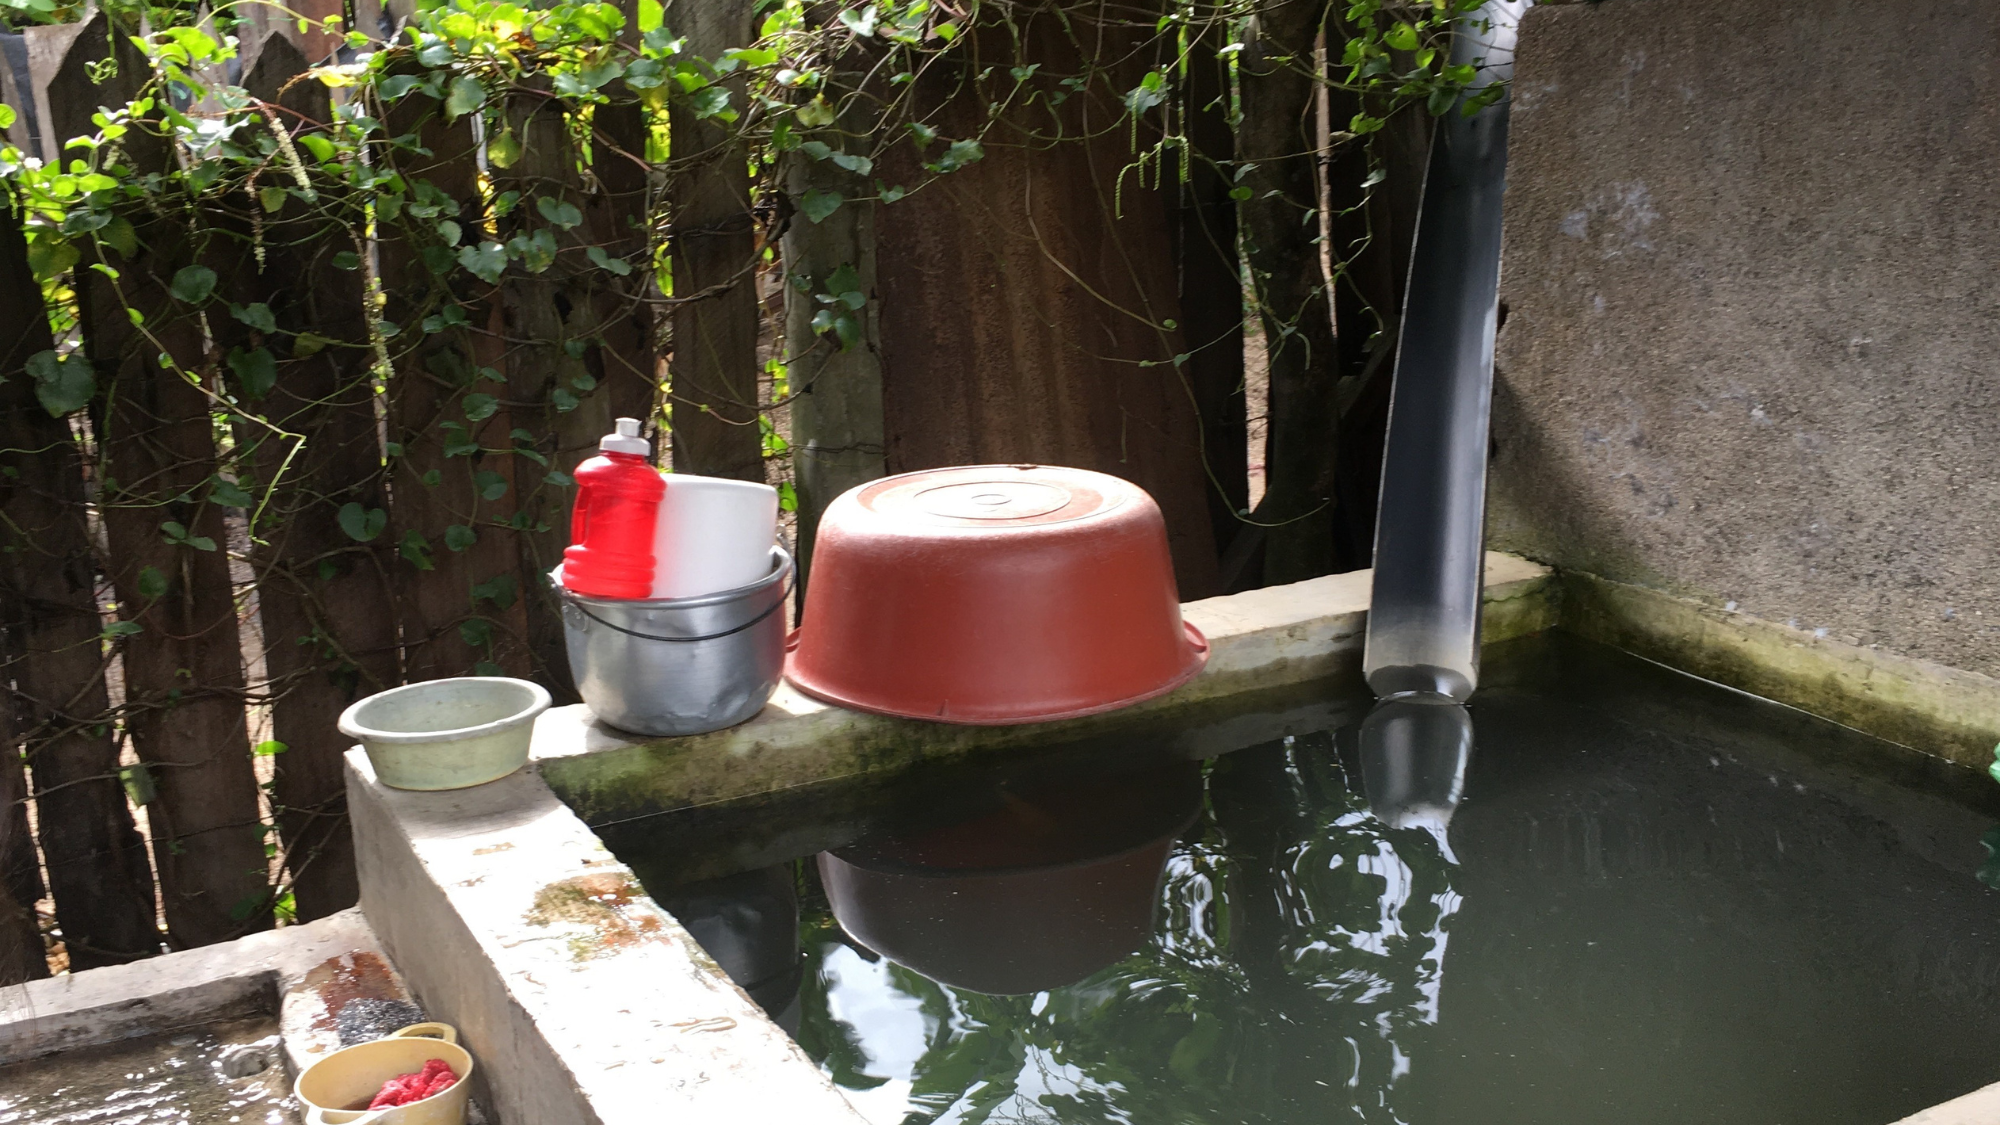 Collection of rainwater for washing and cleaning